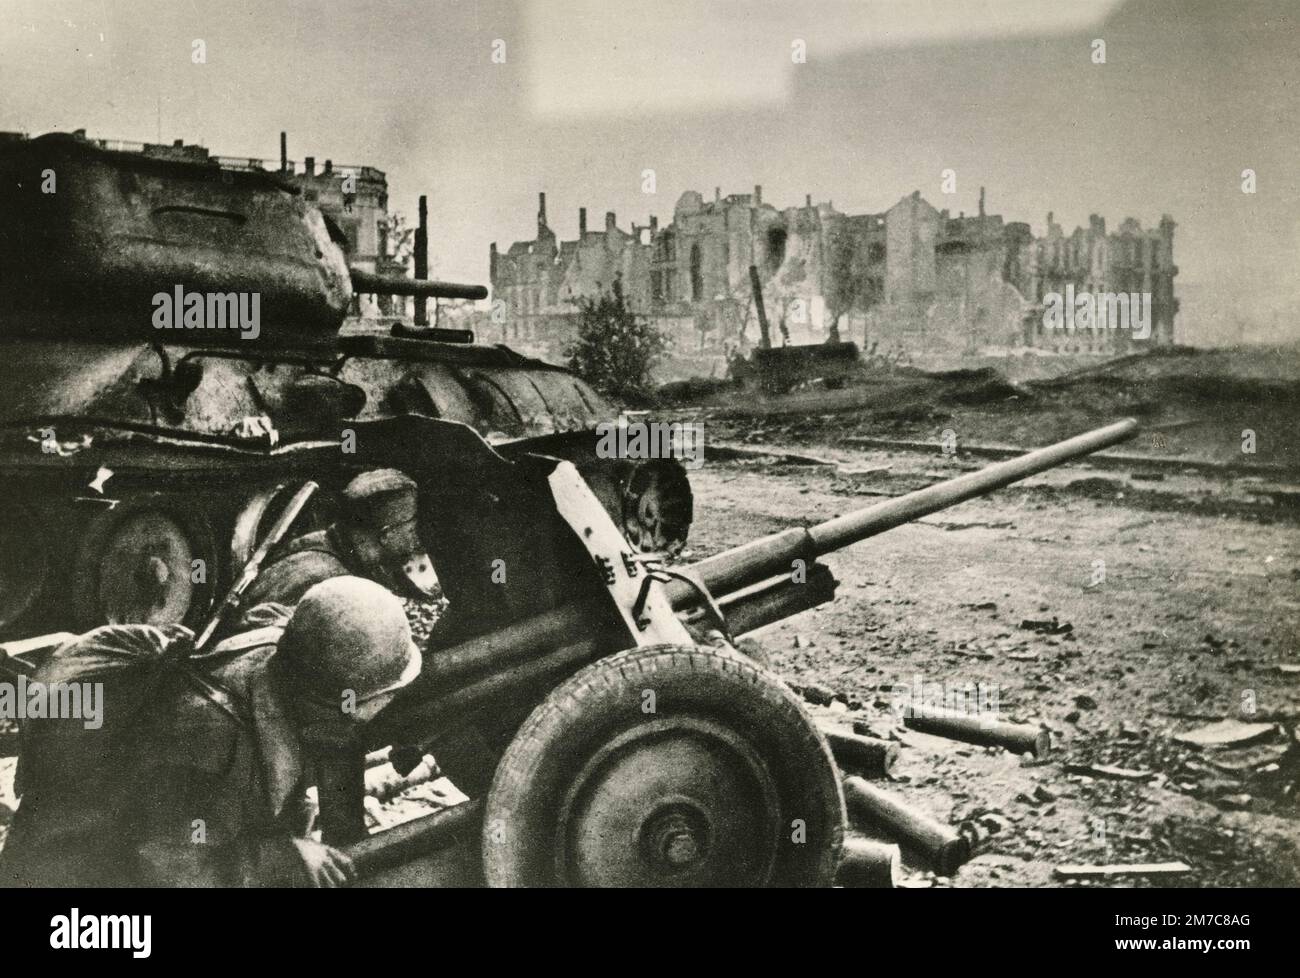 Soldiers shooting with a cannon during World War 2, Germany 1945 Stock Photo